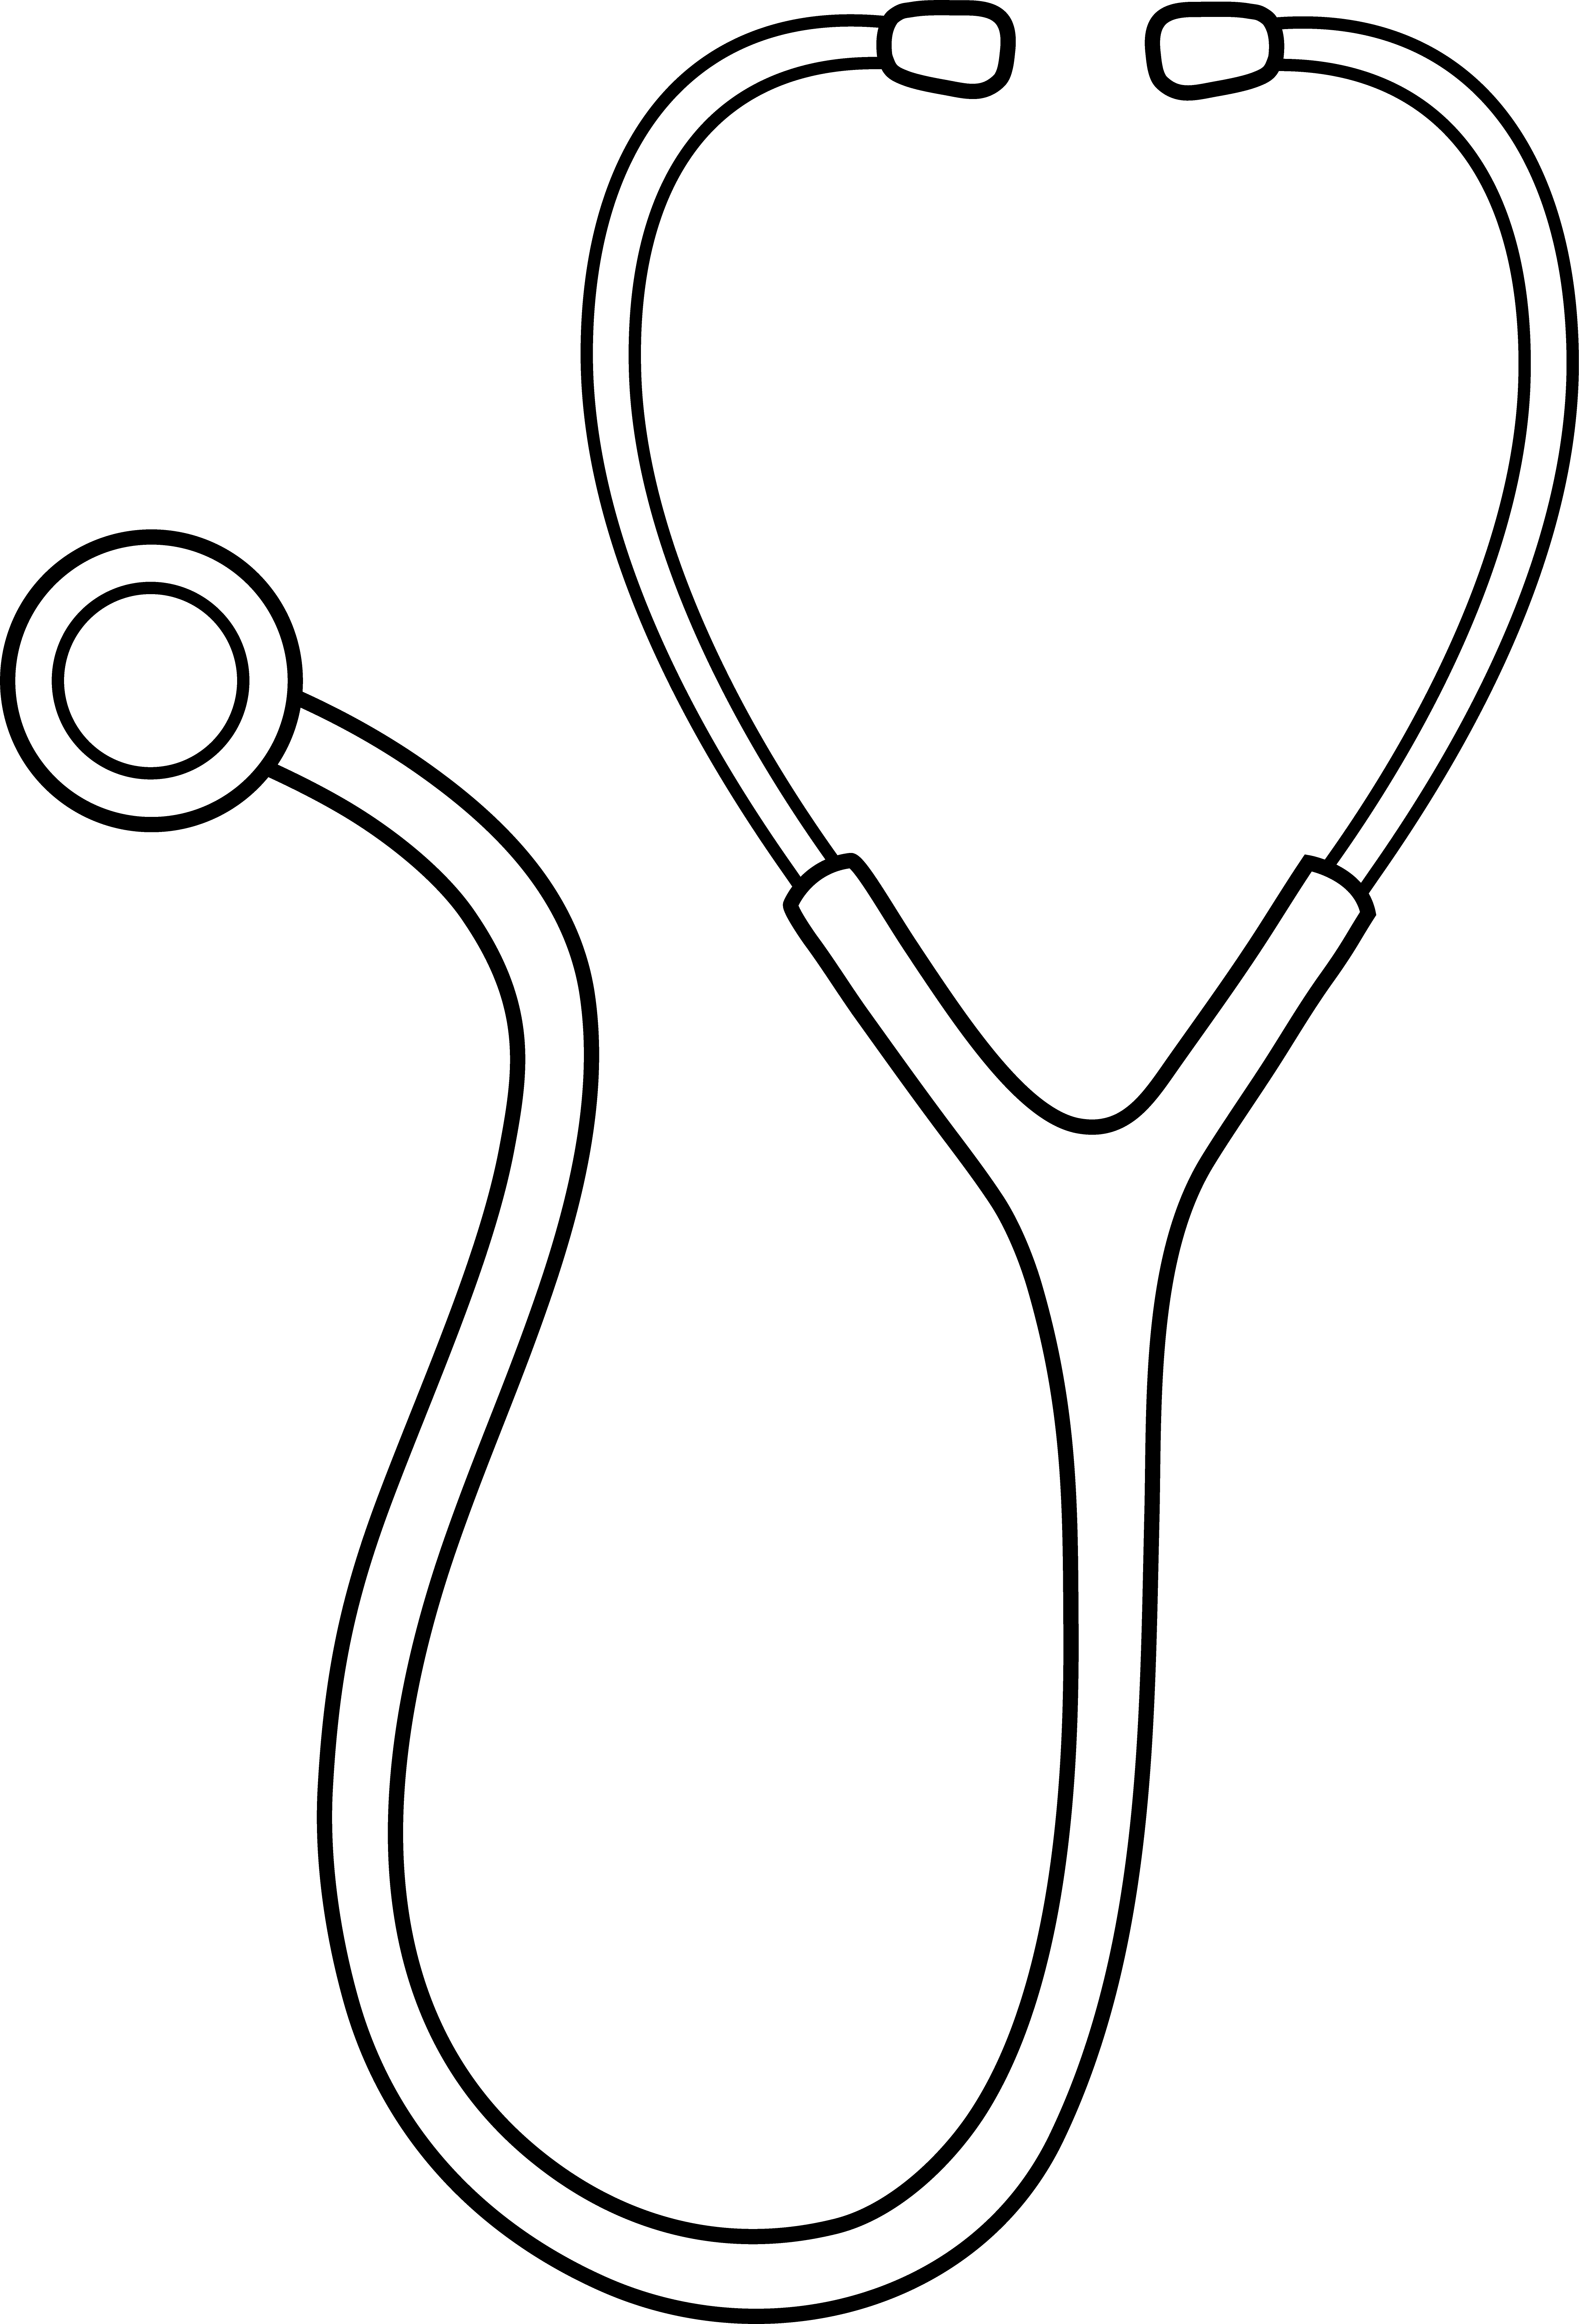 Nurse clipart black and white. Doctor panda free images